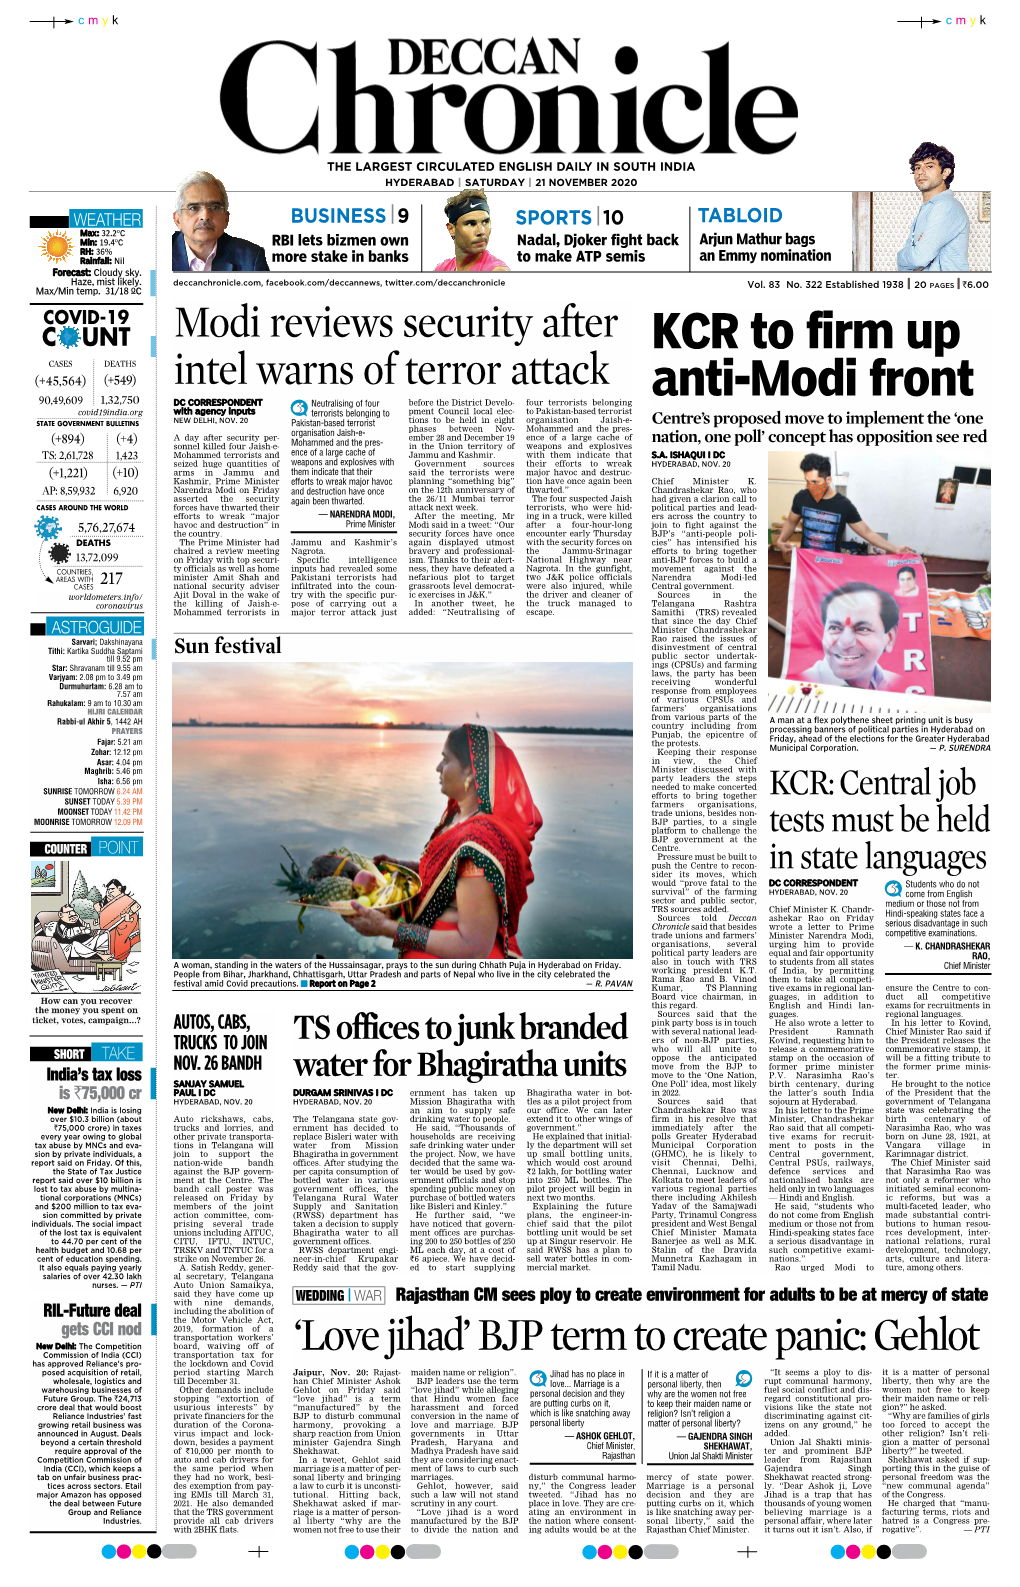 KCR to Firm up Anti-Modi Front